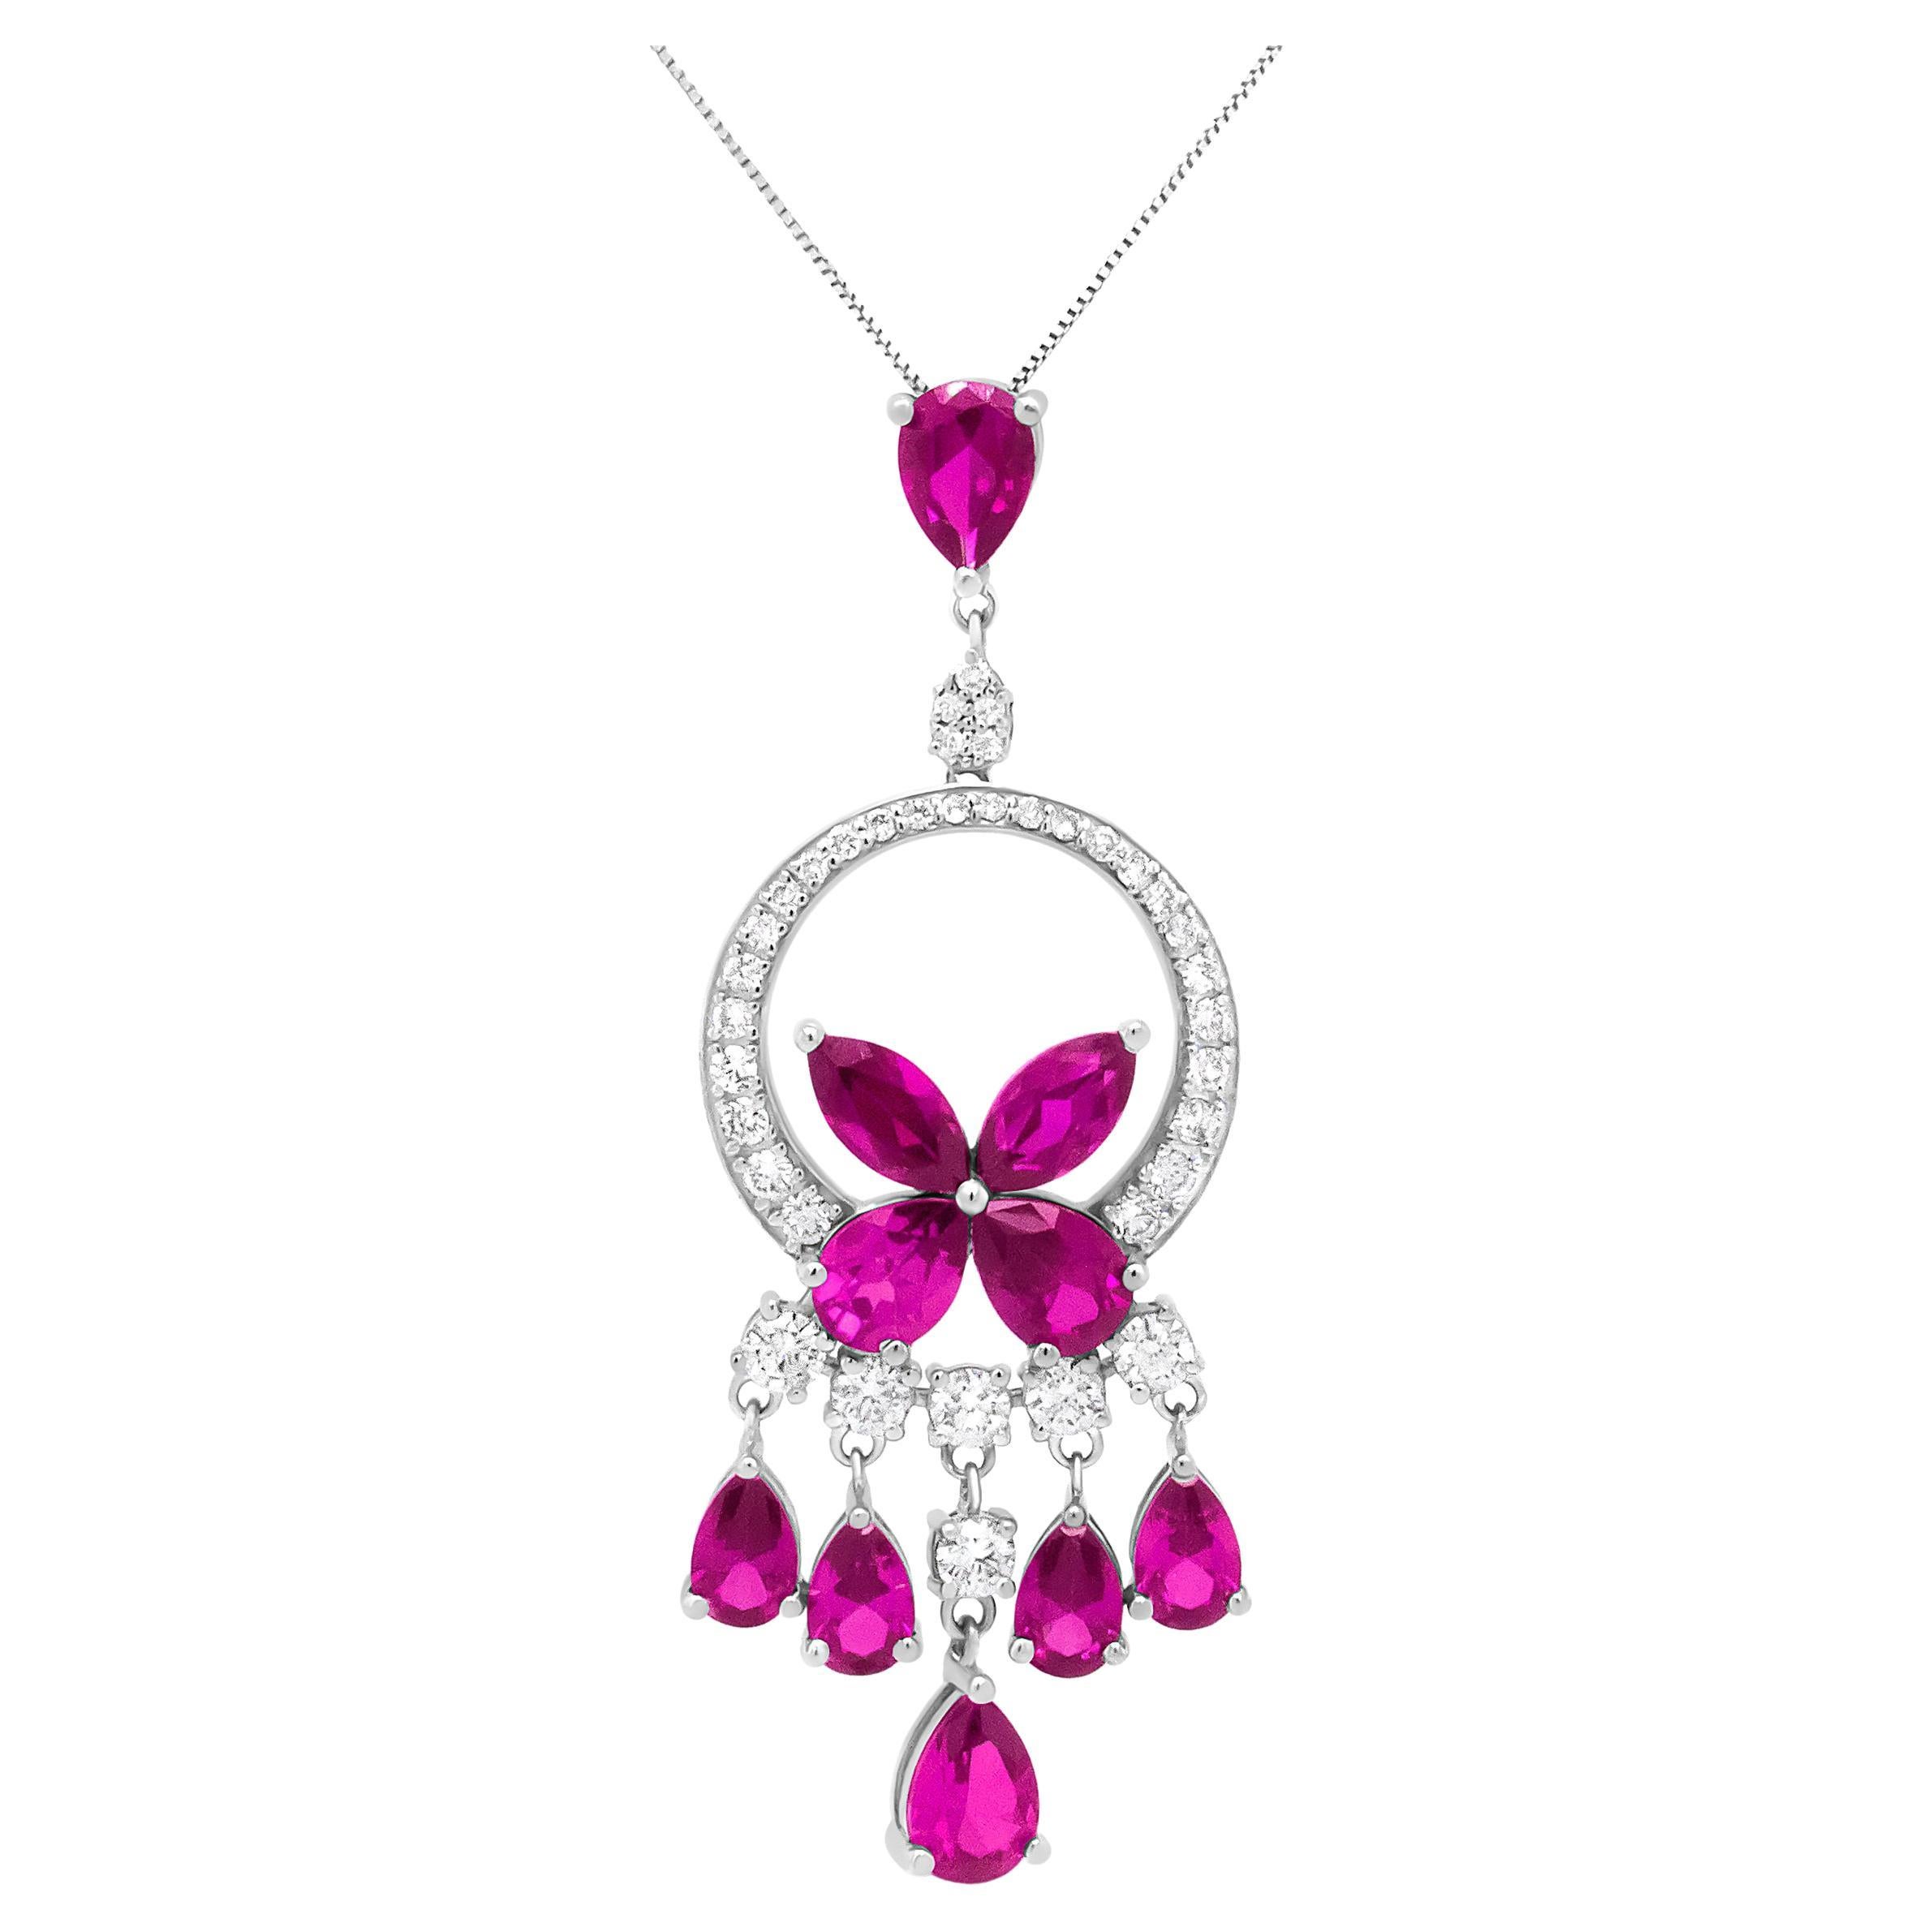 18K White Gold 1.0 Ct Diamond & Red Ruby Floral Chandelier Drop Pendant Necklace